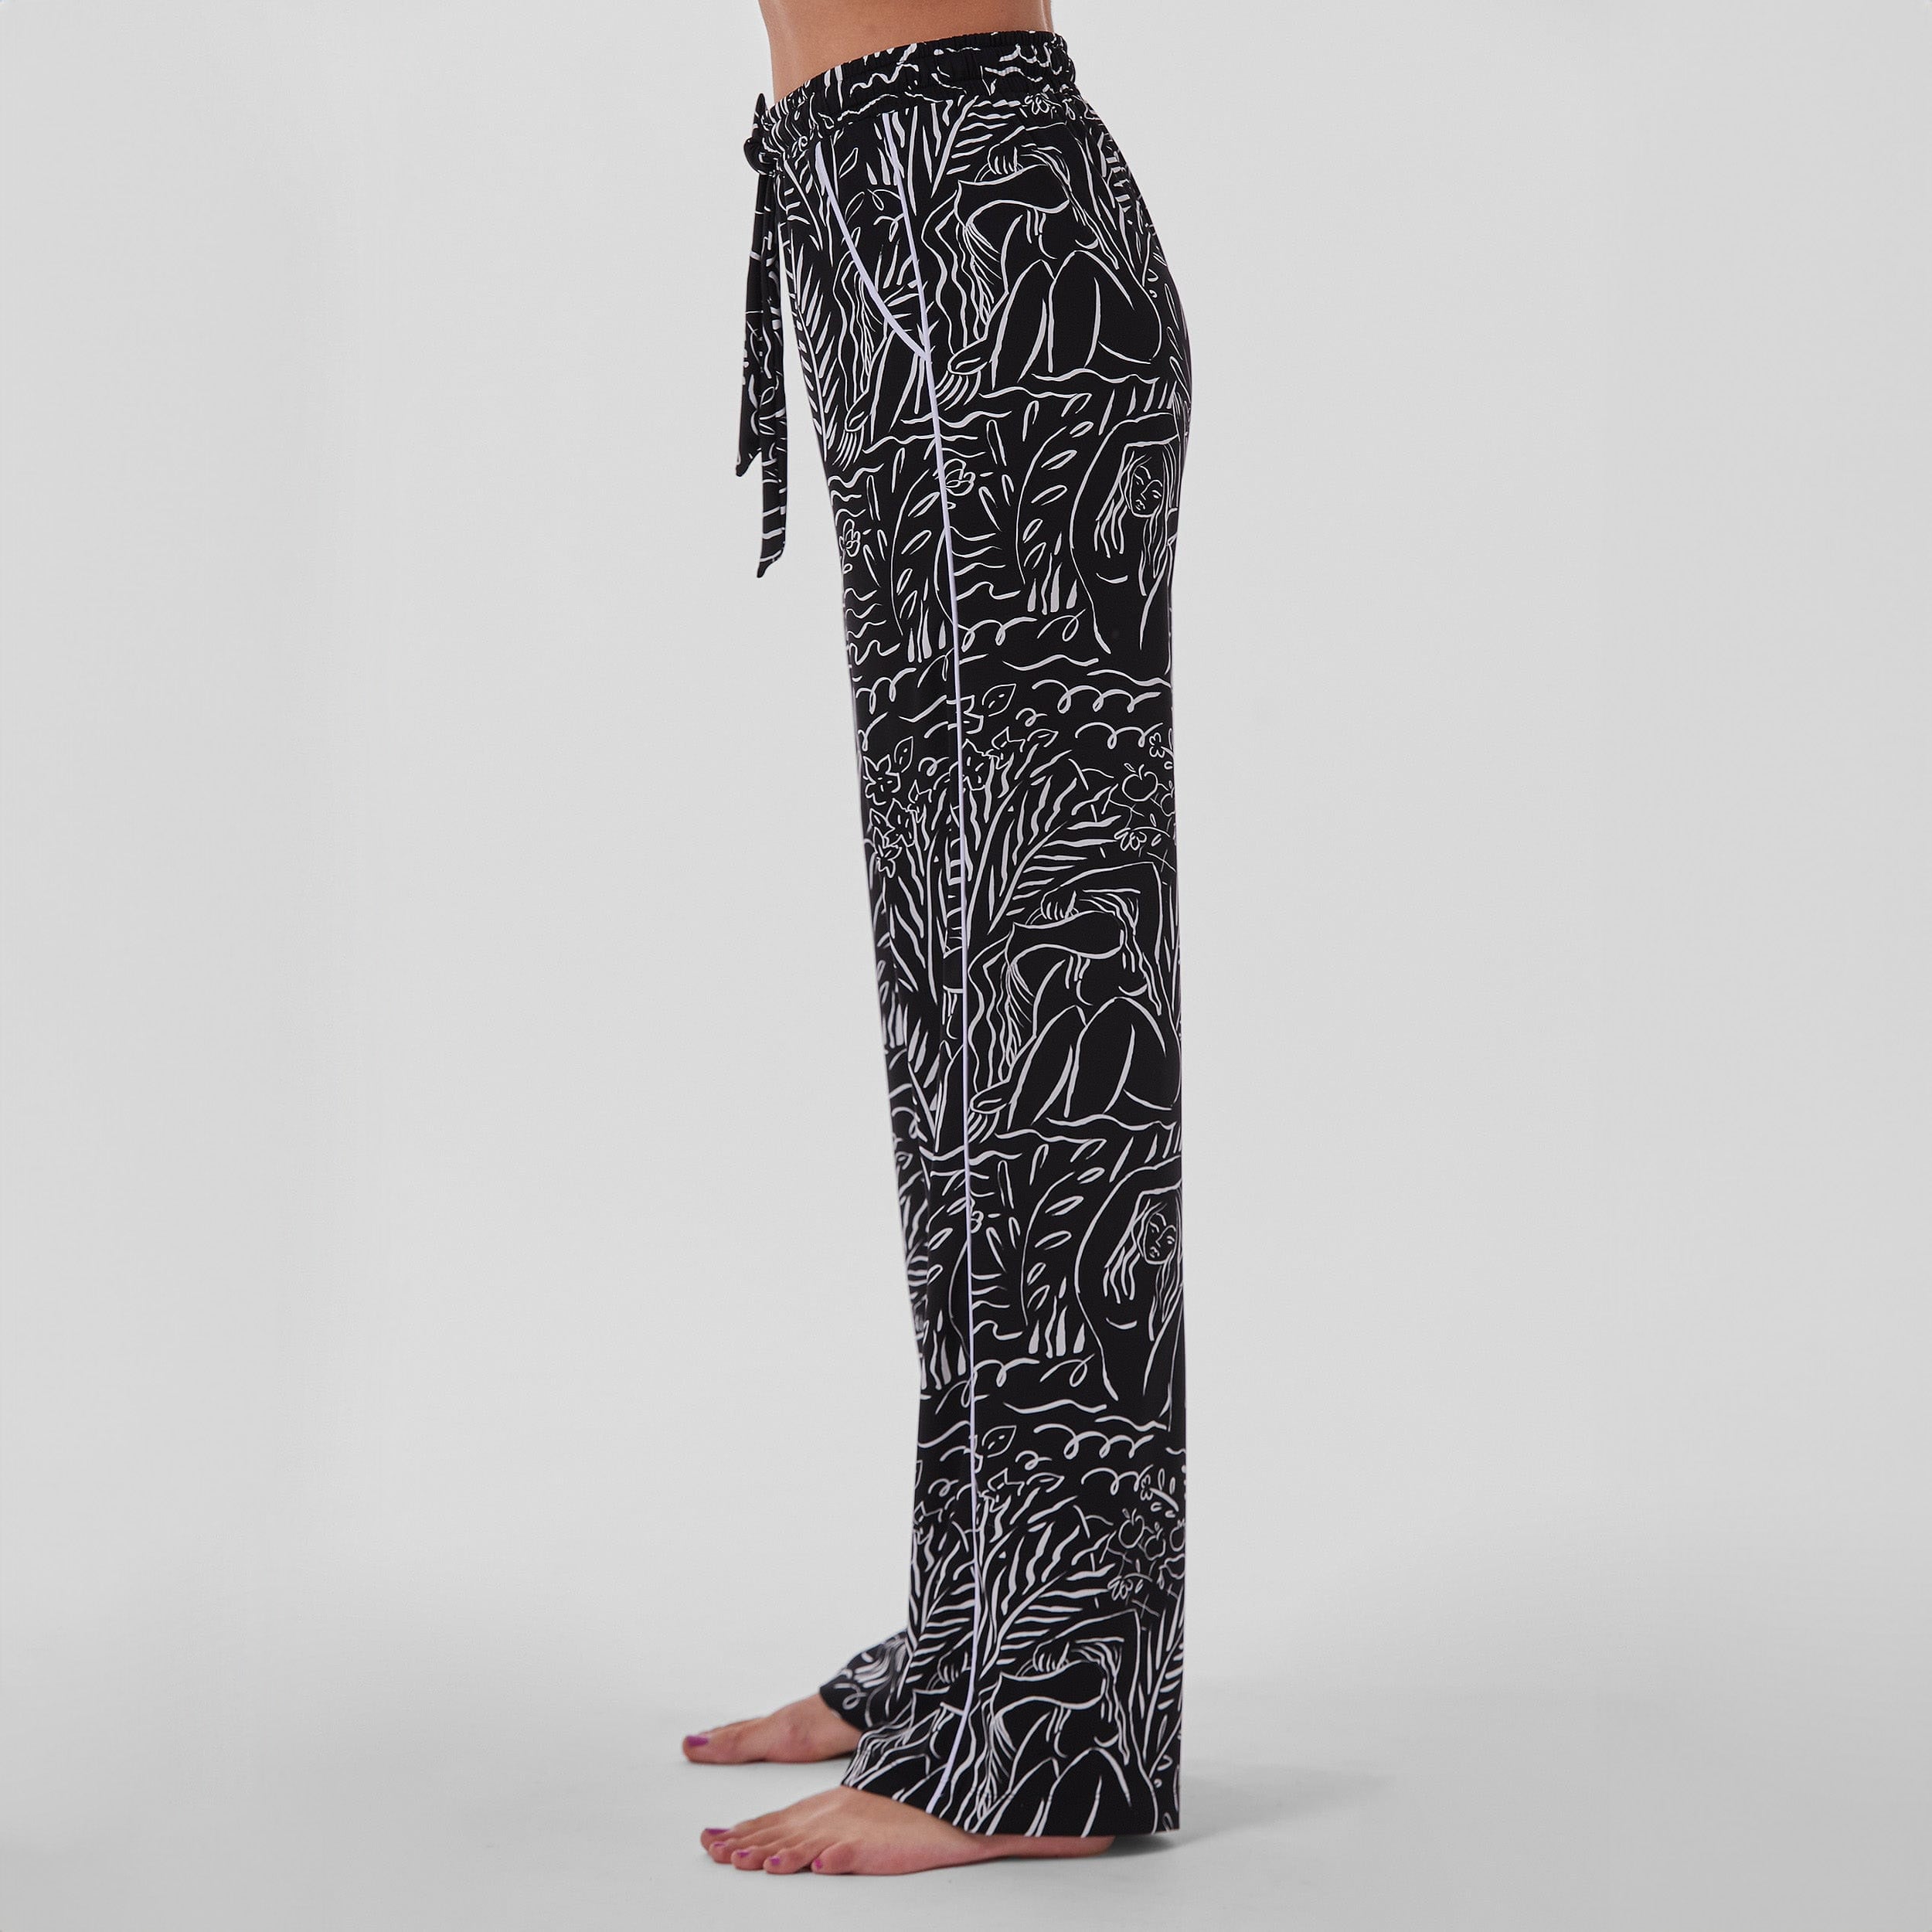 Side view of woman wearing breathable, relaxed and buttery smooth pajama pant featuring high-waist cut, side pockets, front tie and stunning Venus print.